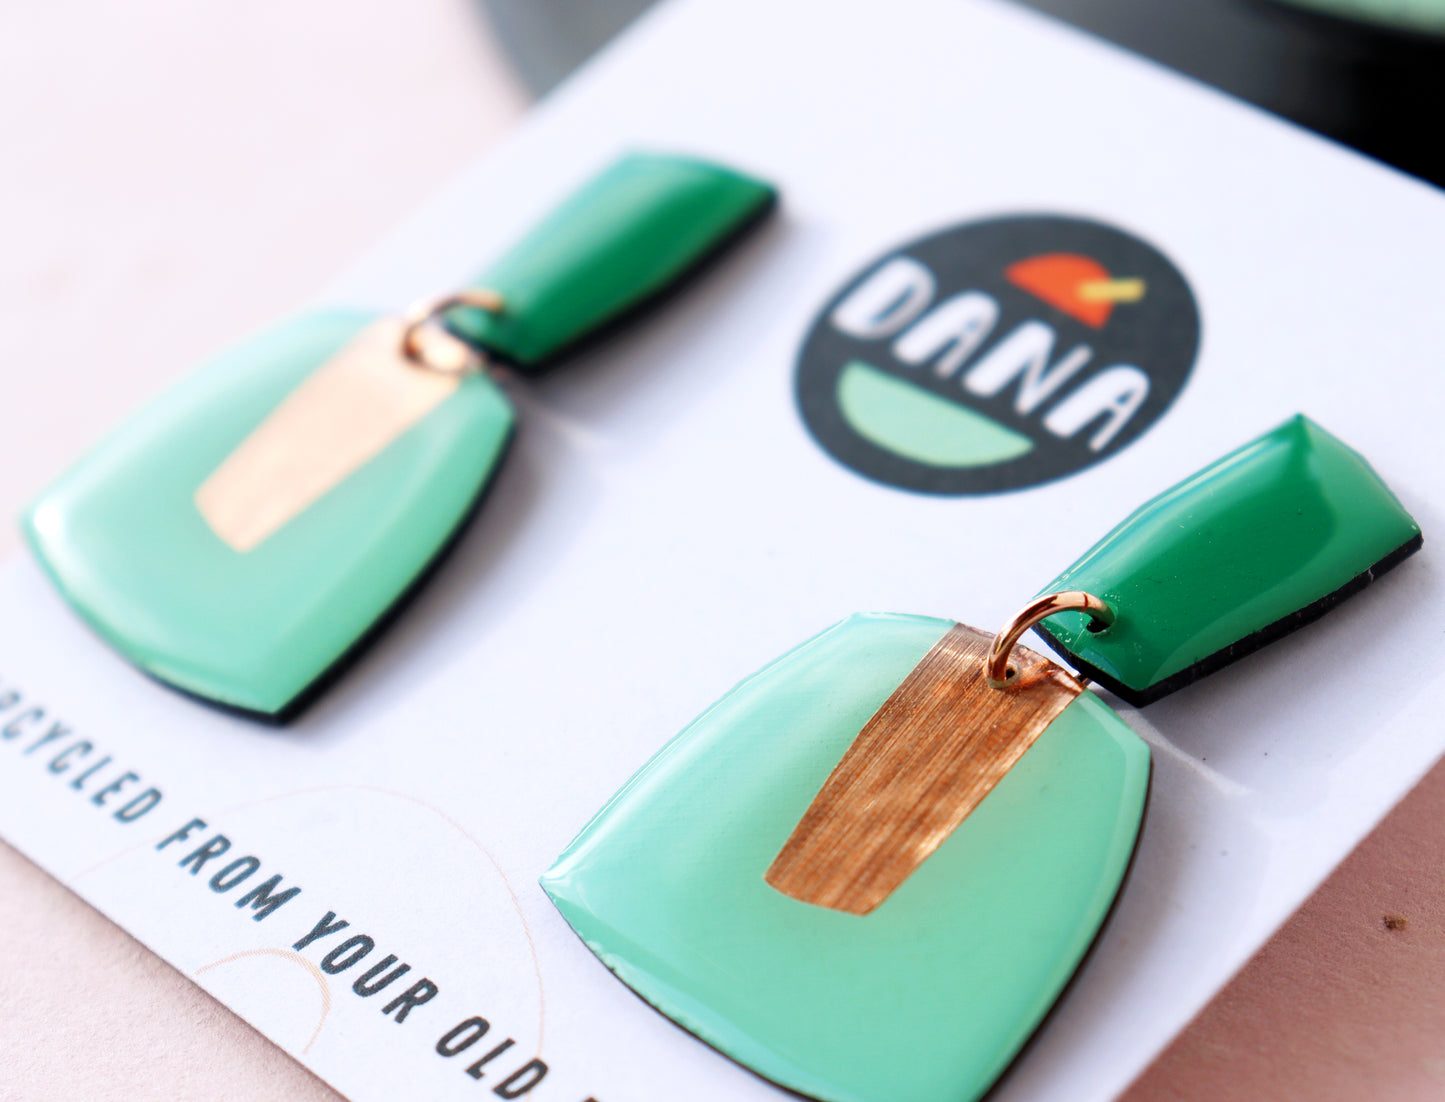 PATSY no.1 in deep green, turquoise & a warm touch of copper / Irish jewellery design